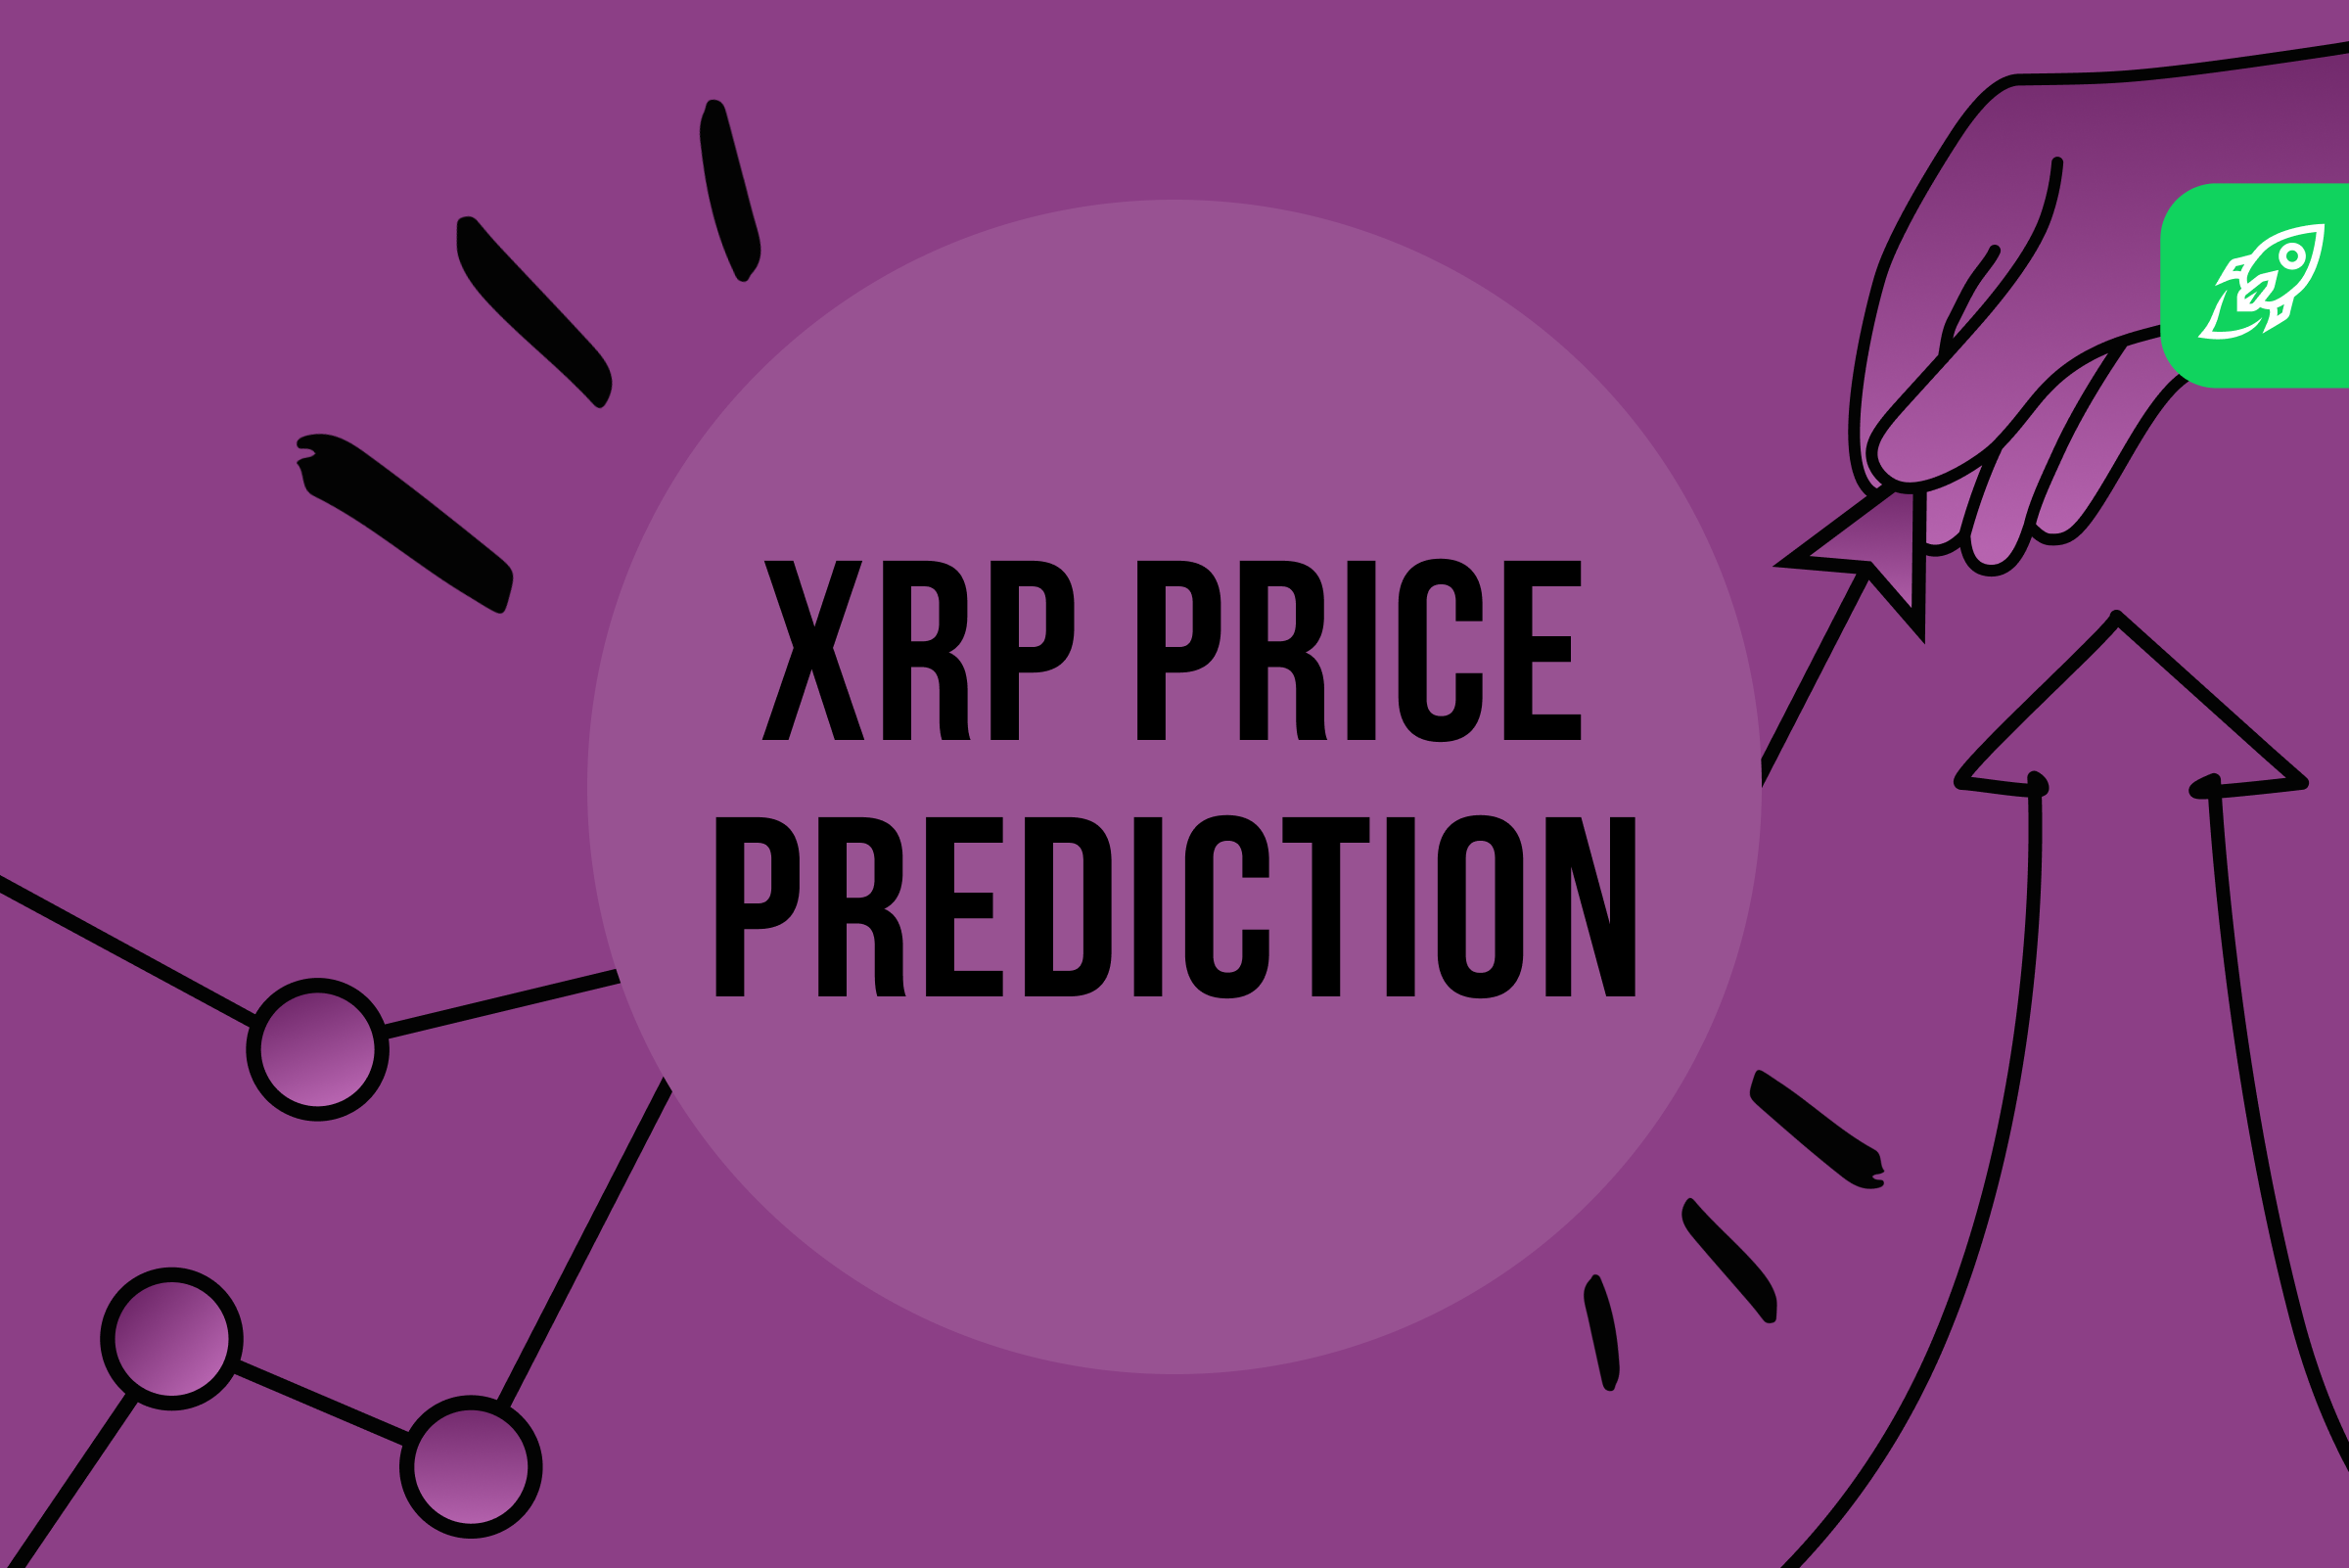 EOS, Ethereum and Ripple’s XRP – Daily Tech Analysis – June 18th, 